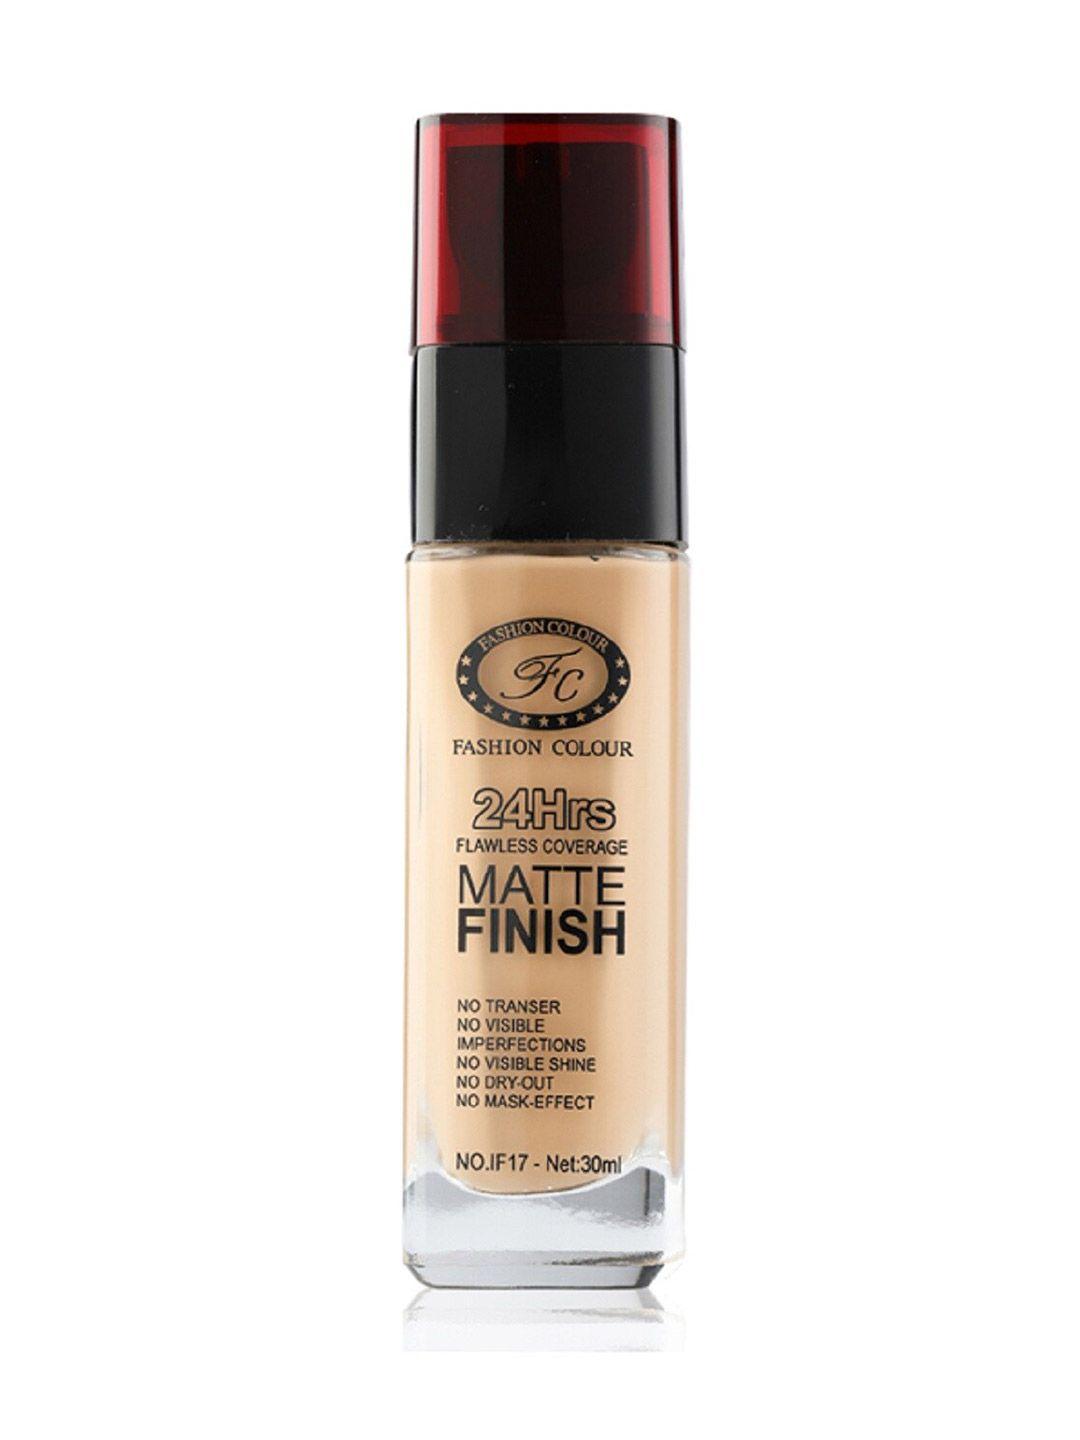 fashion colour 24hrs flawless coverage no transfer matte finish foundation 30ml - shade 03